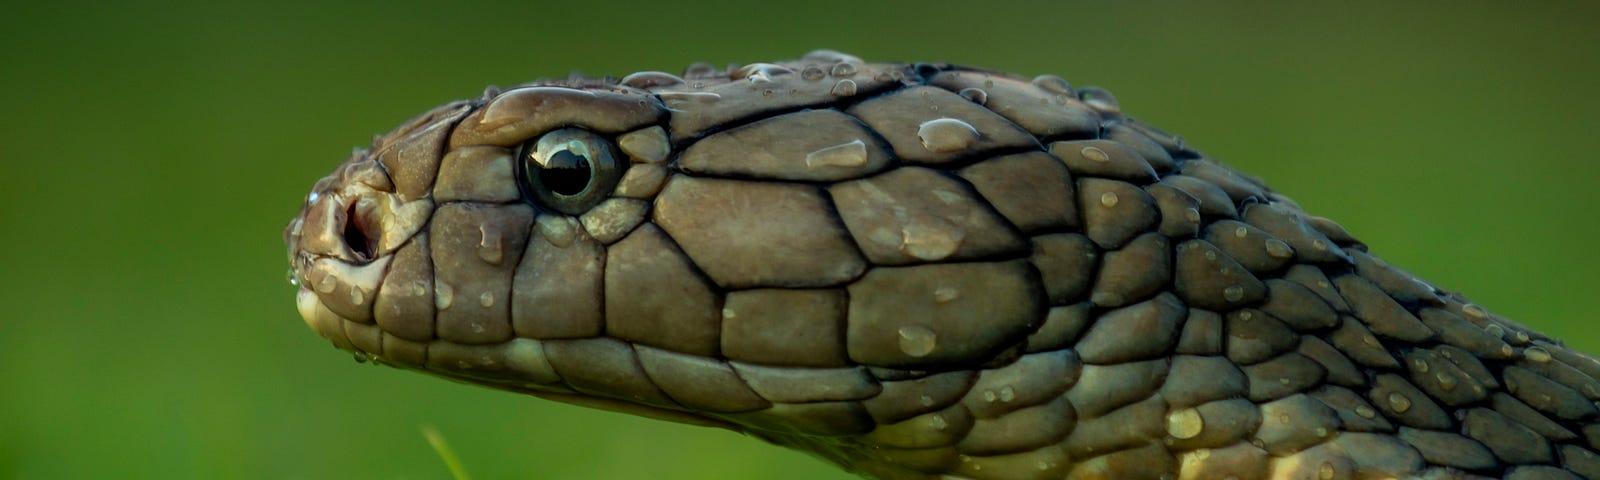 A snake’s head, peering out above a field of grass.